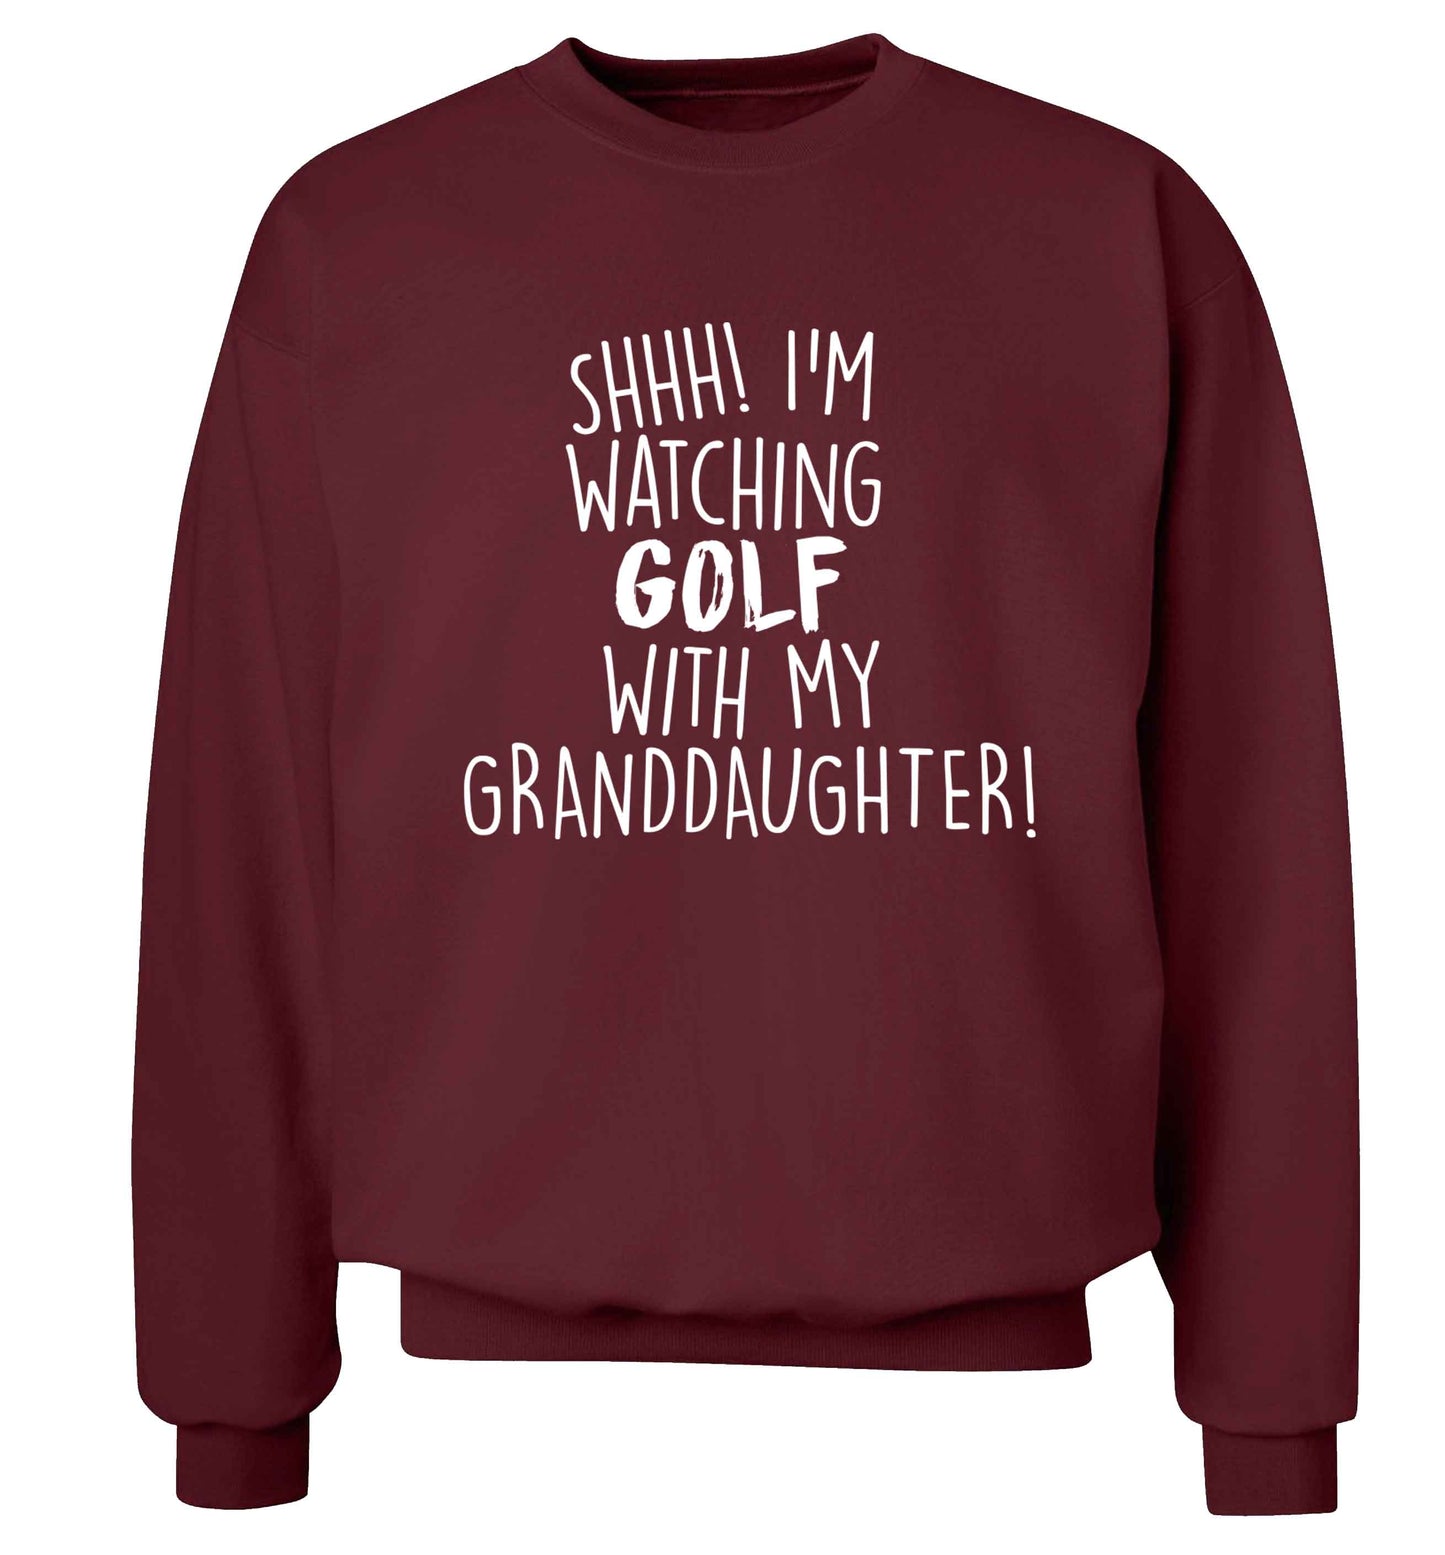 Shh I'm watching golf with my granddaughter Adult's unisex maroon Sweater 2XL